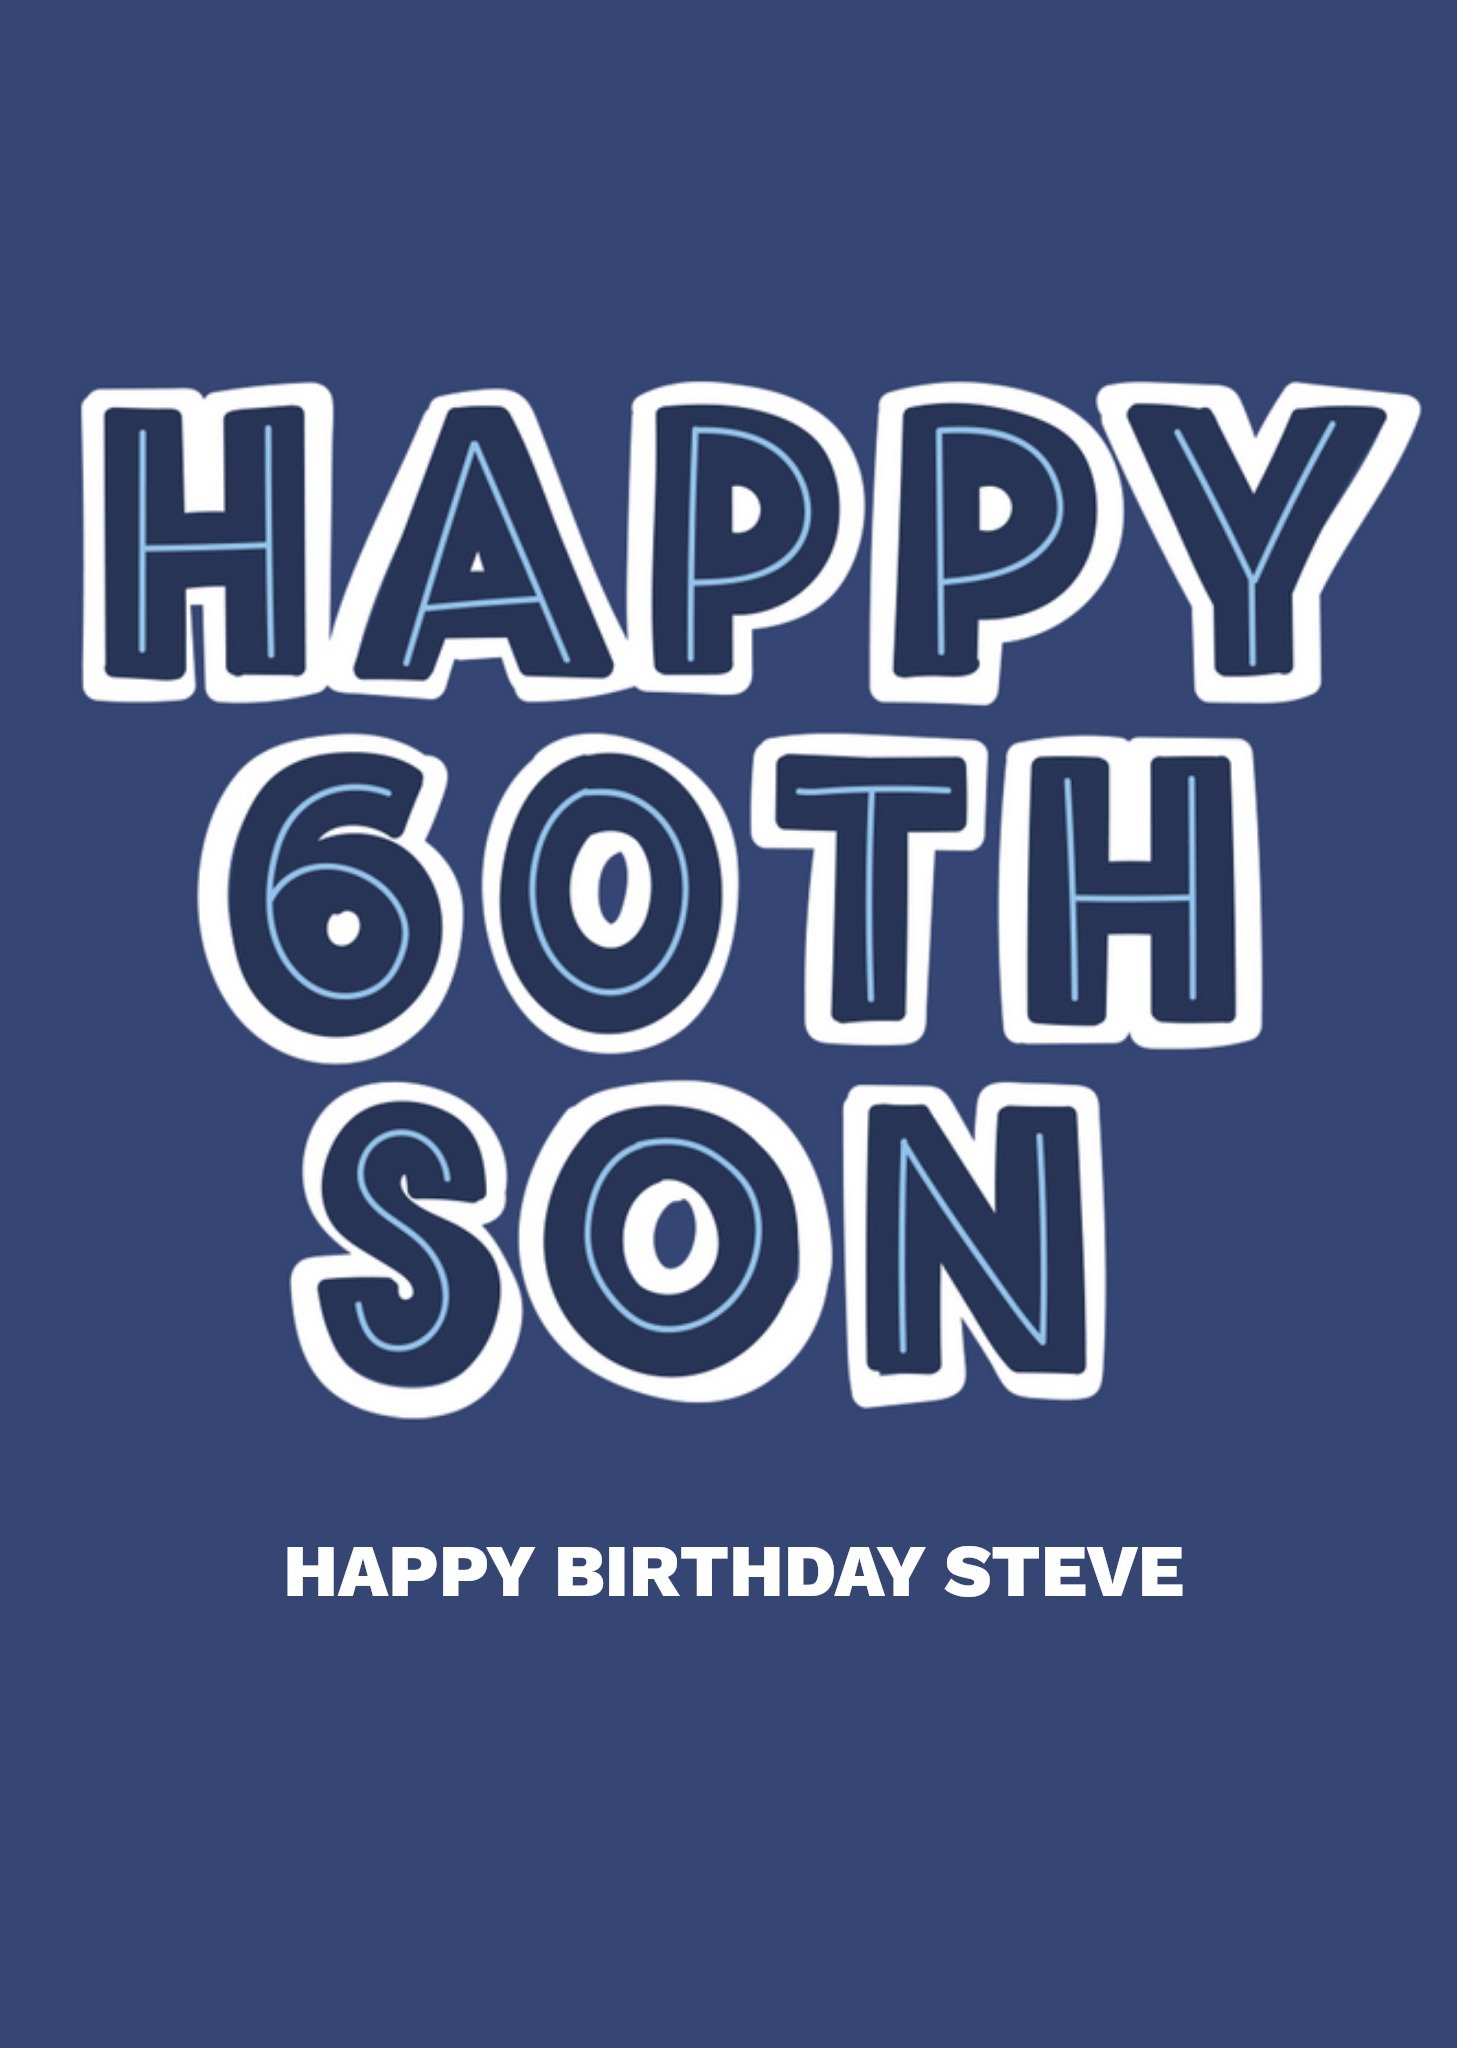 Moonpig Typographic Outline Lettering Happy 60th Son Birthday Card, Large